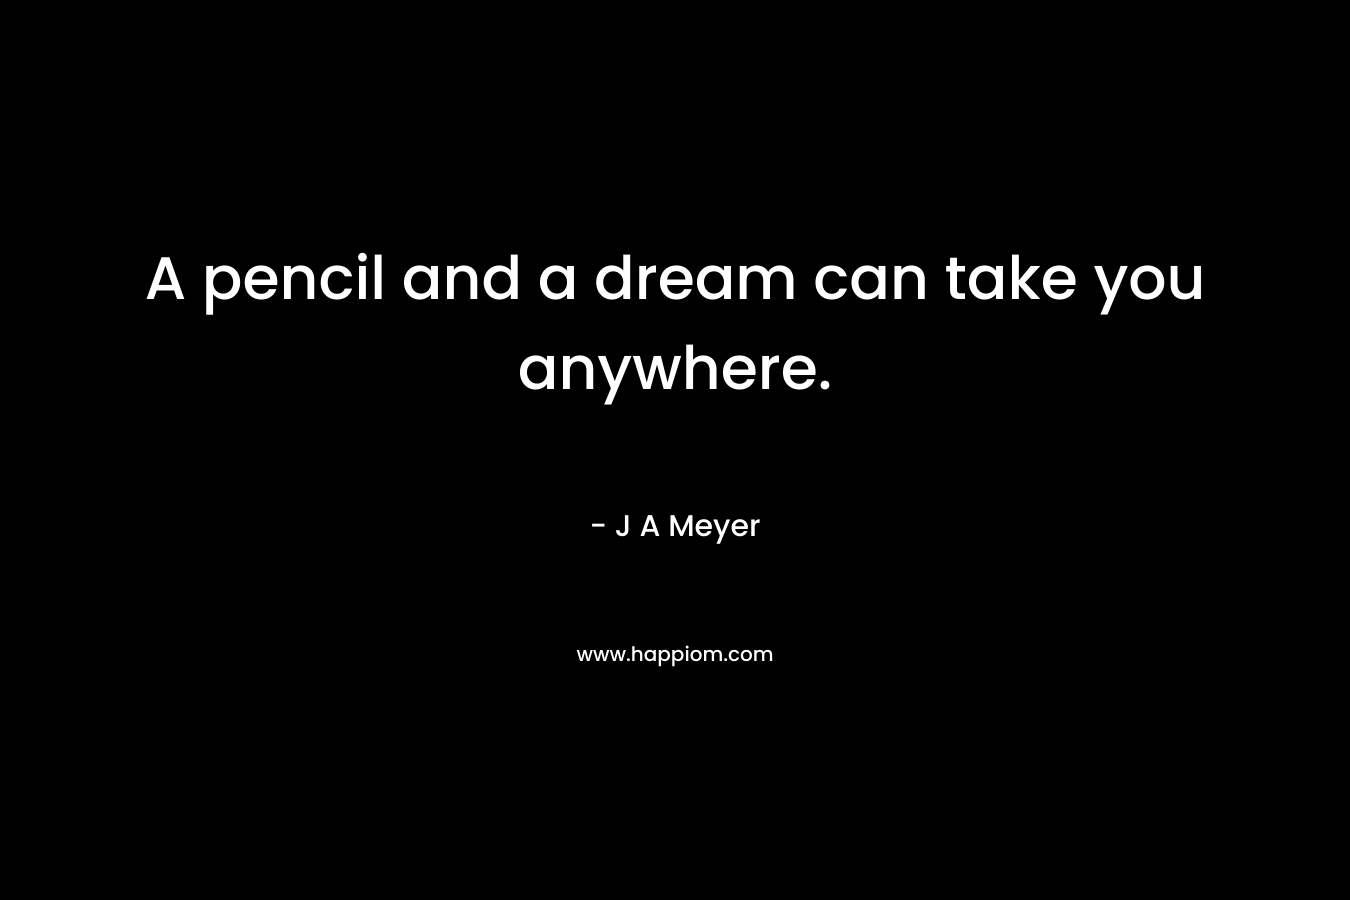 A pencil and a dream can take you anywhere. – J A Meyer